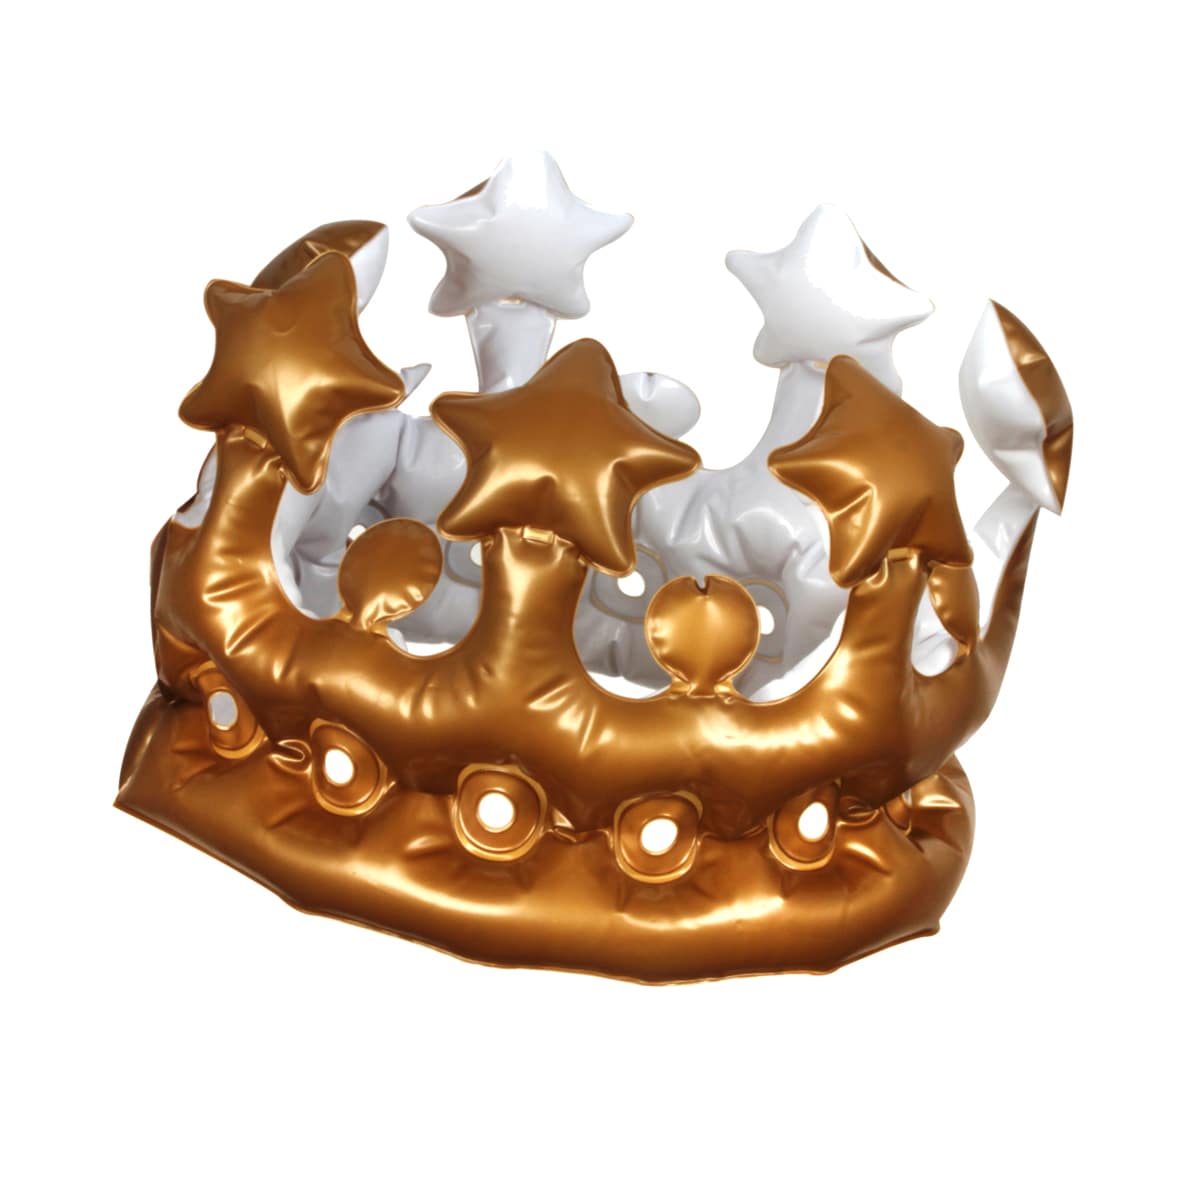 COURONNE ROYALE GONFLABLE